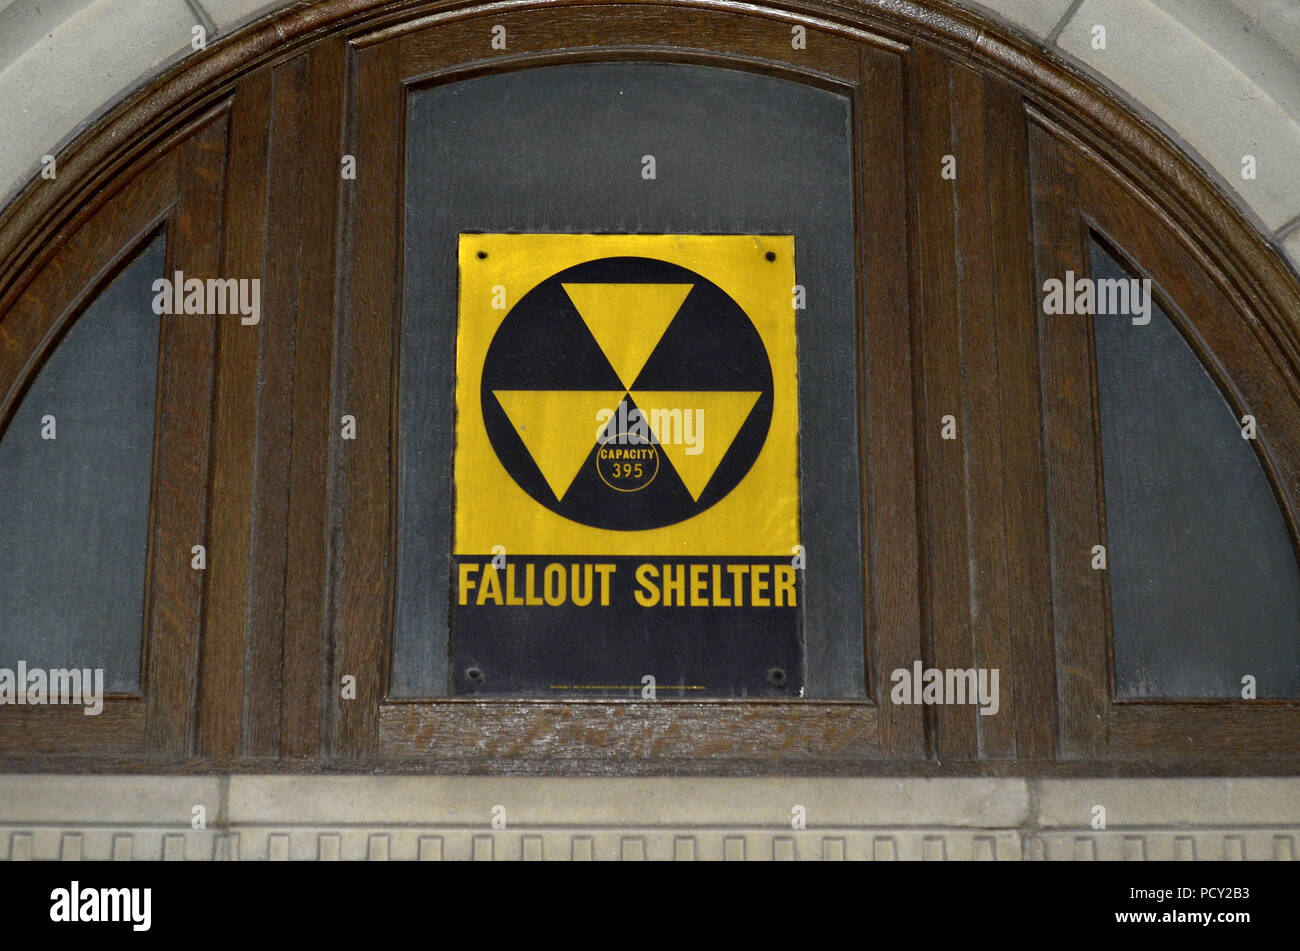 Fallout Shelter sign in downtown San Antonio, Texas, United States (capacity: 395 people). Stock Photo